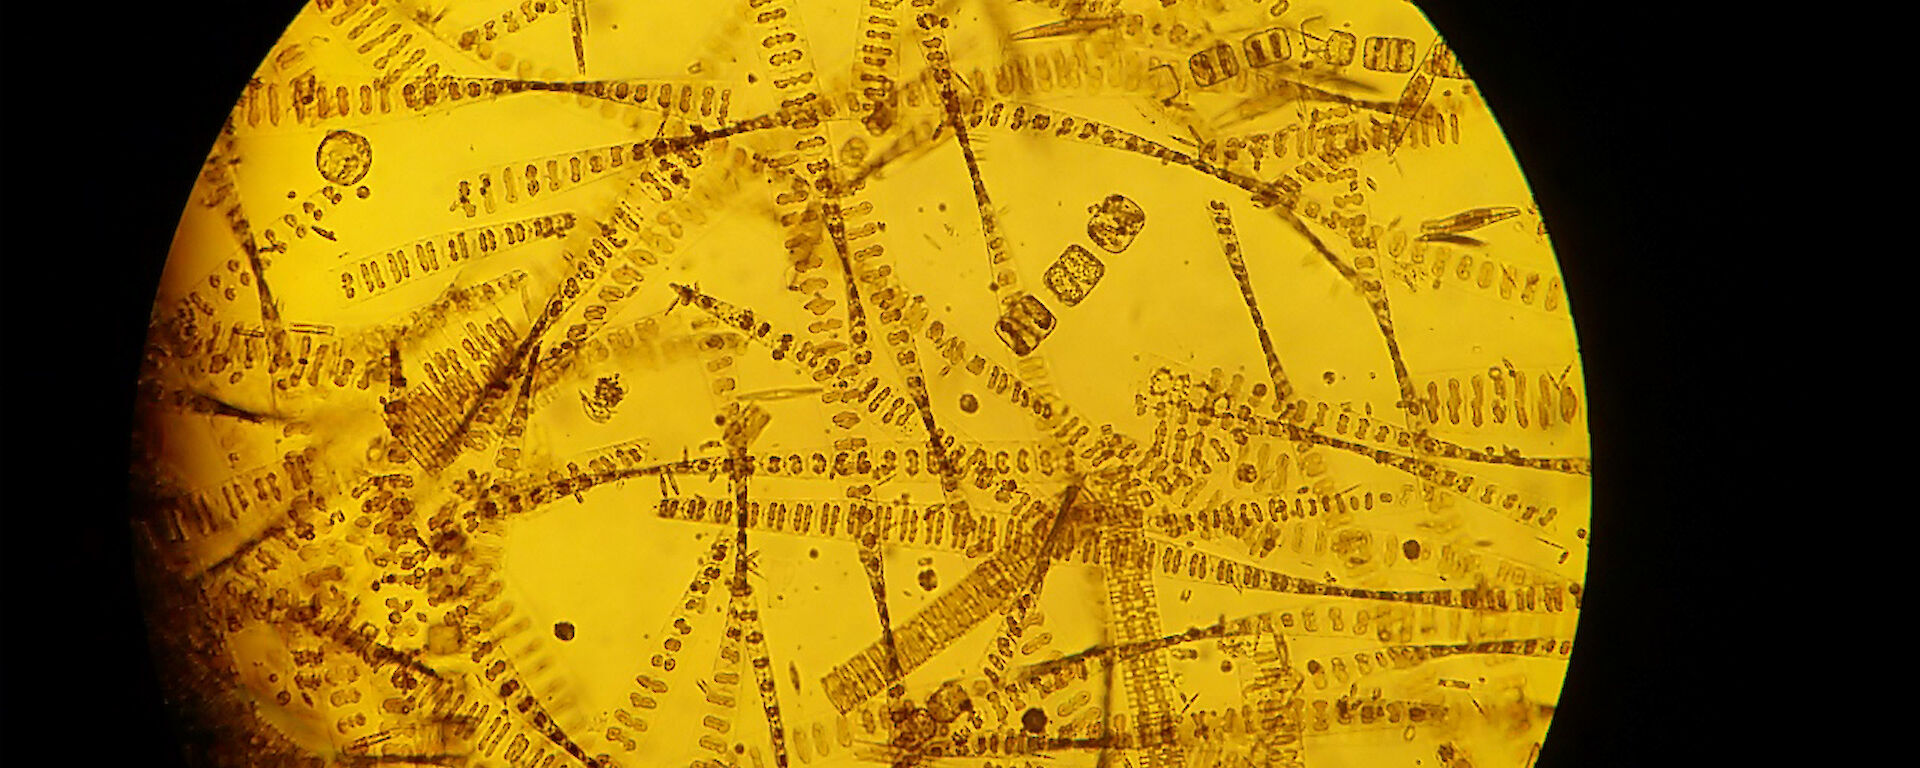 A microscopic view of sea ice diatoms collected from fast-ice cores. These algae have silicate frustules and form colonies and chains, and are adapted to the low light conditions under the ice.